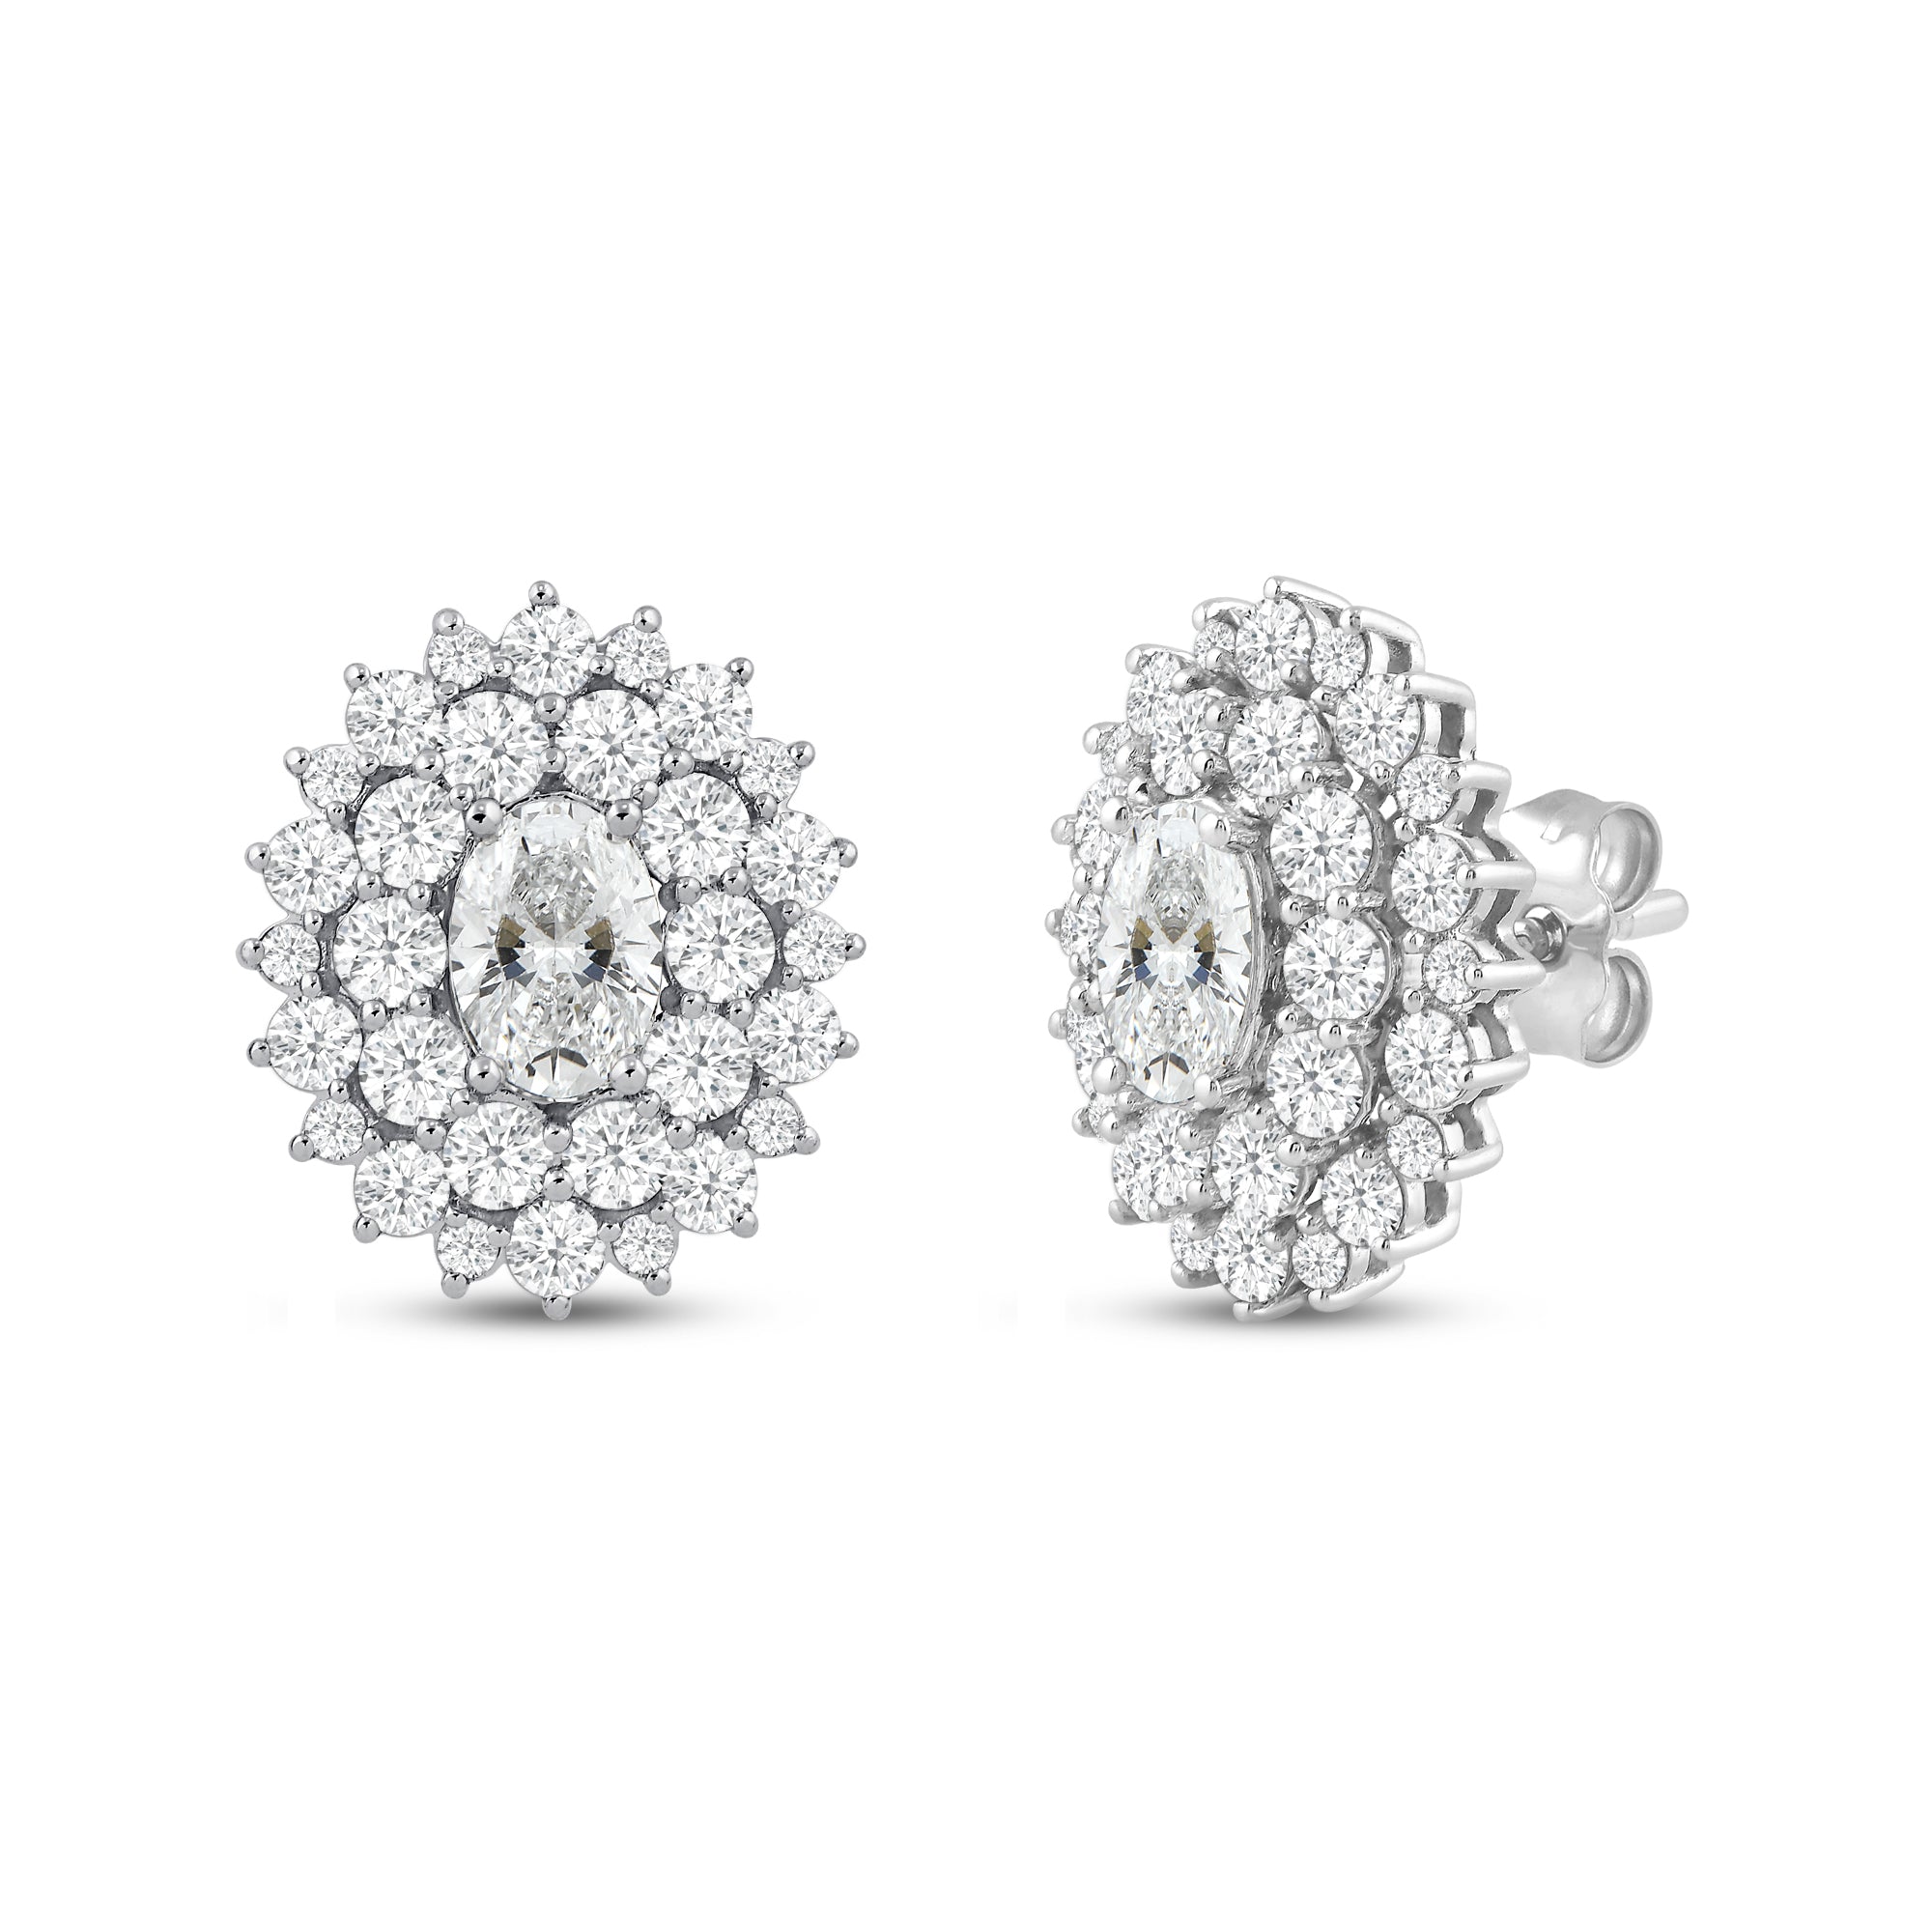 Flower Cluster Diamond Earrings – With Clarity